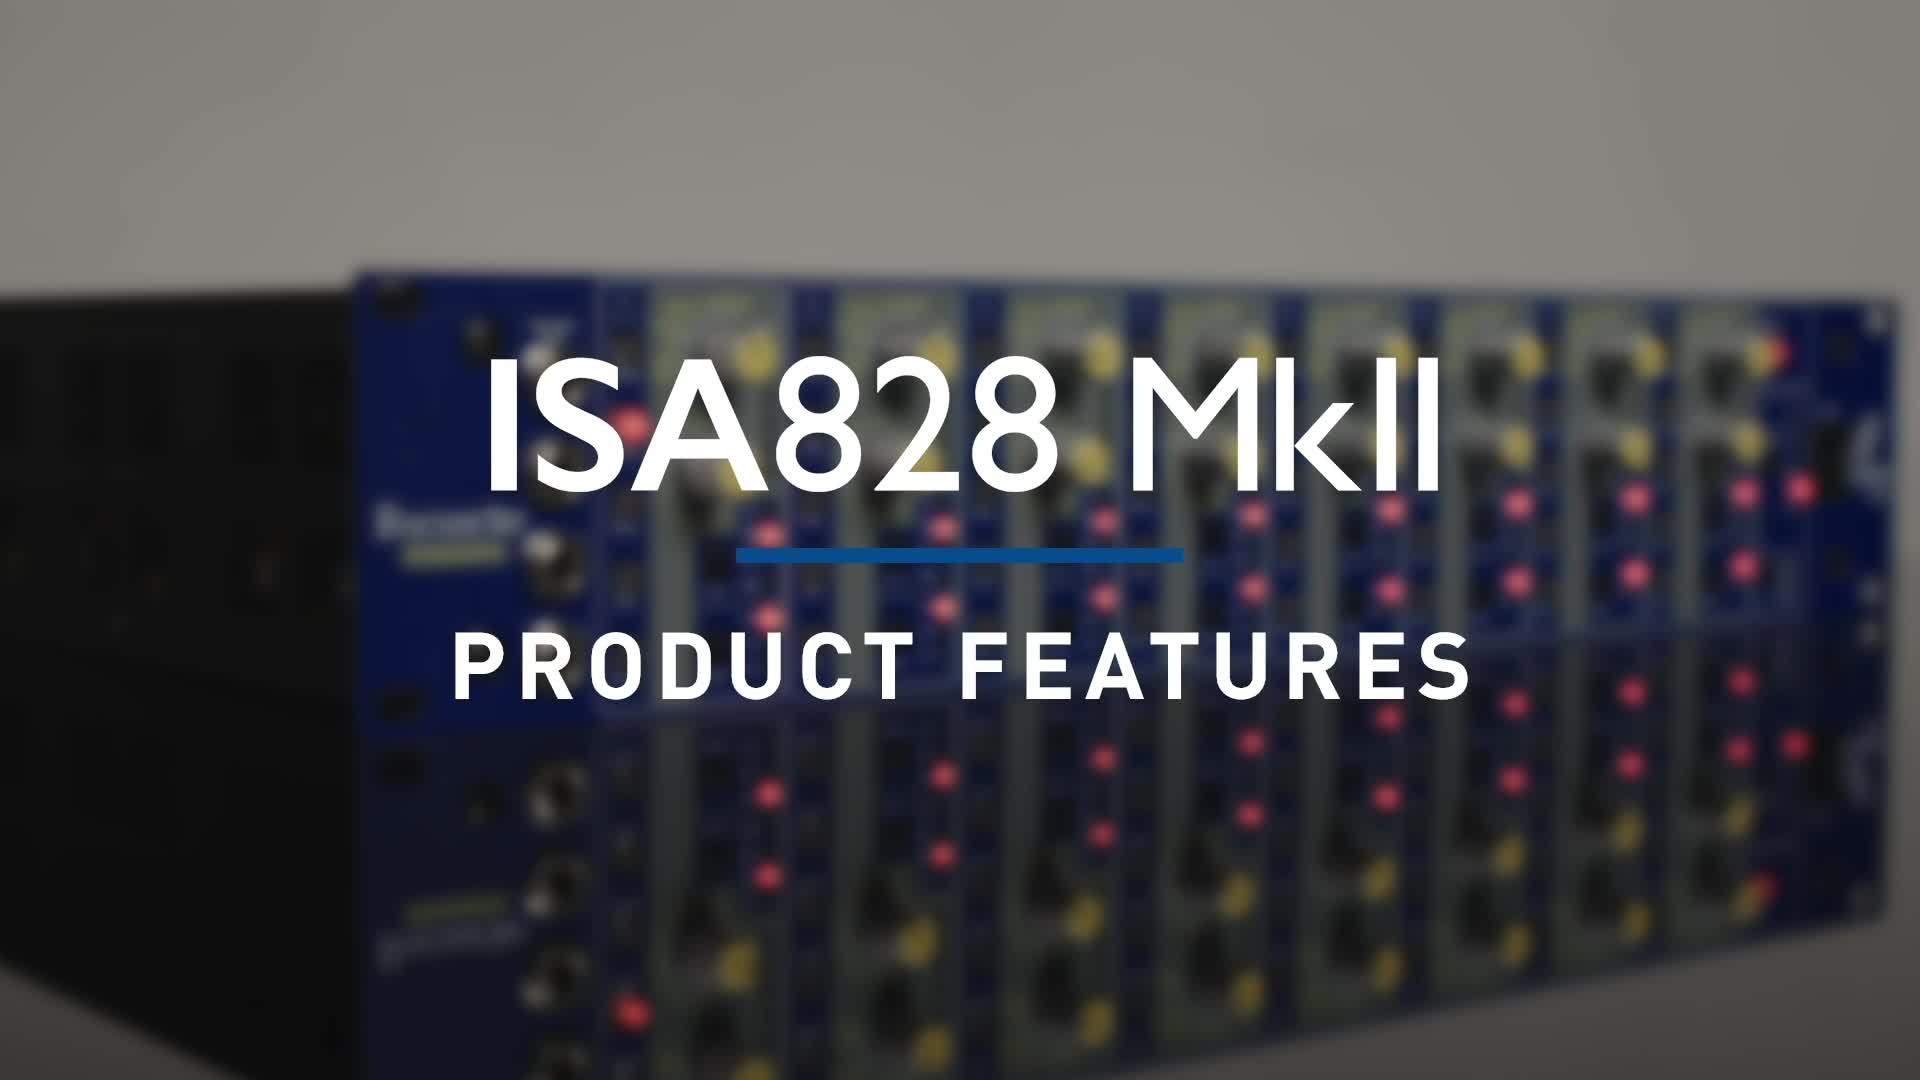 Focusrite - ISA828 MKII Overview